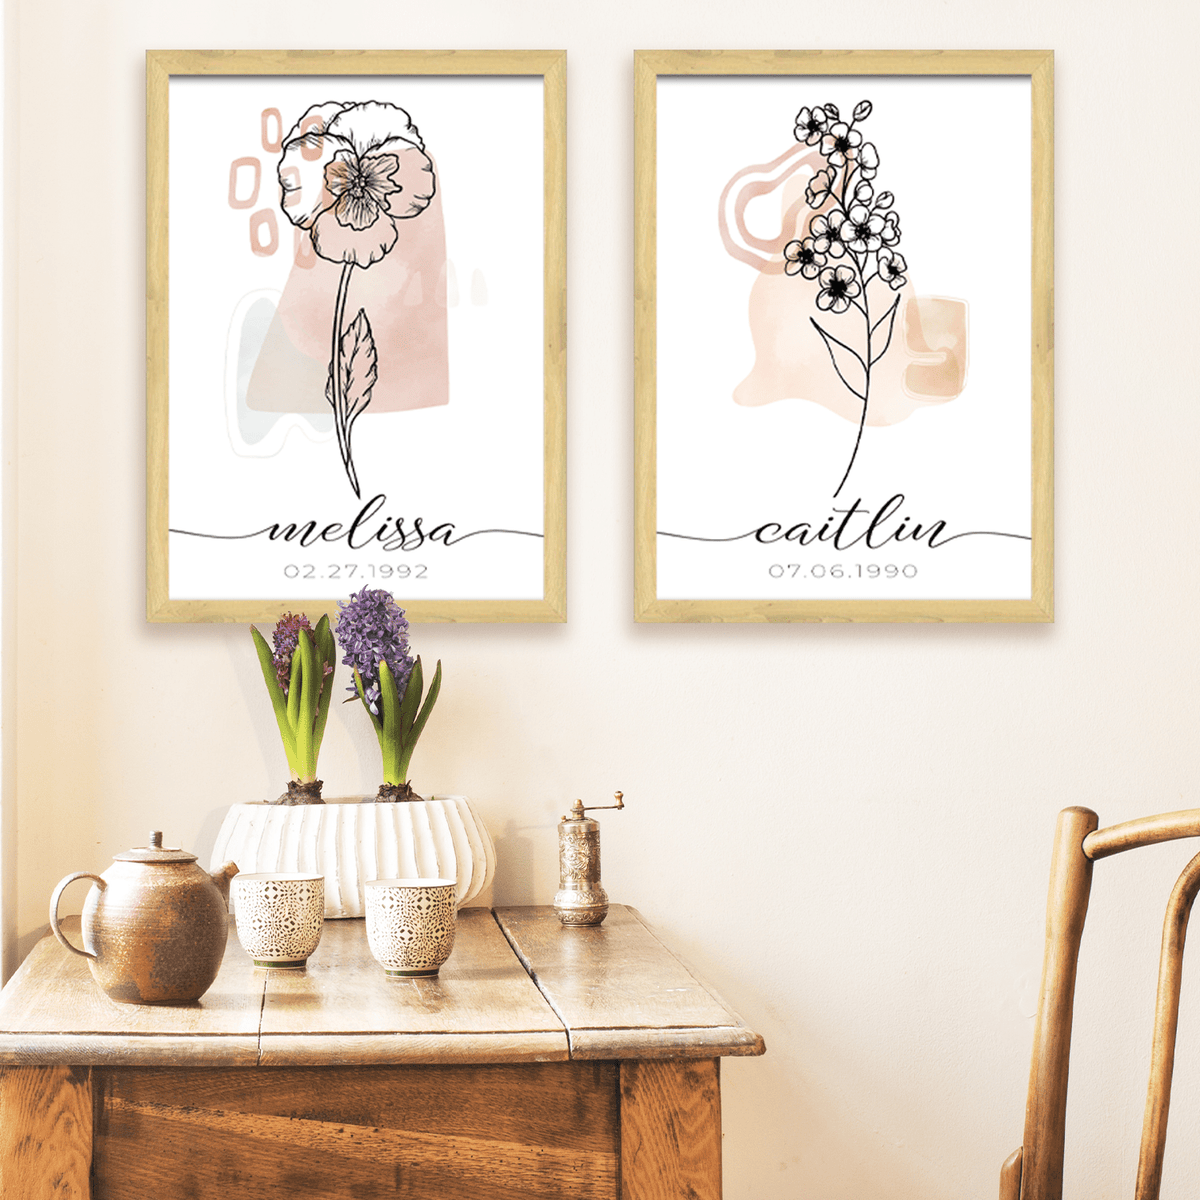 Elegant personalized art and personalized gifts from Personal Prints